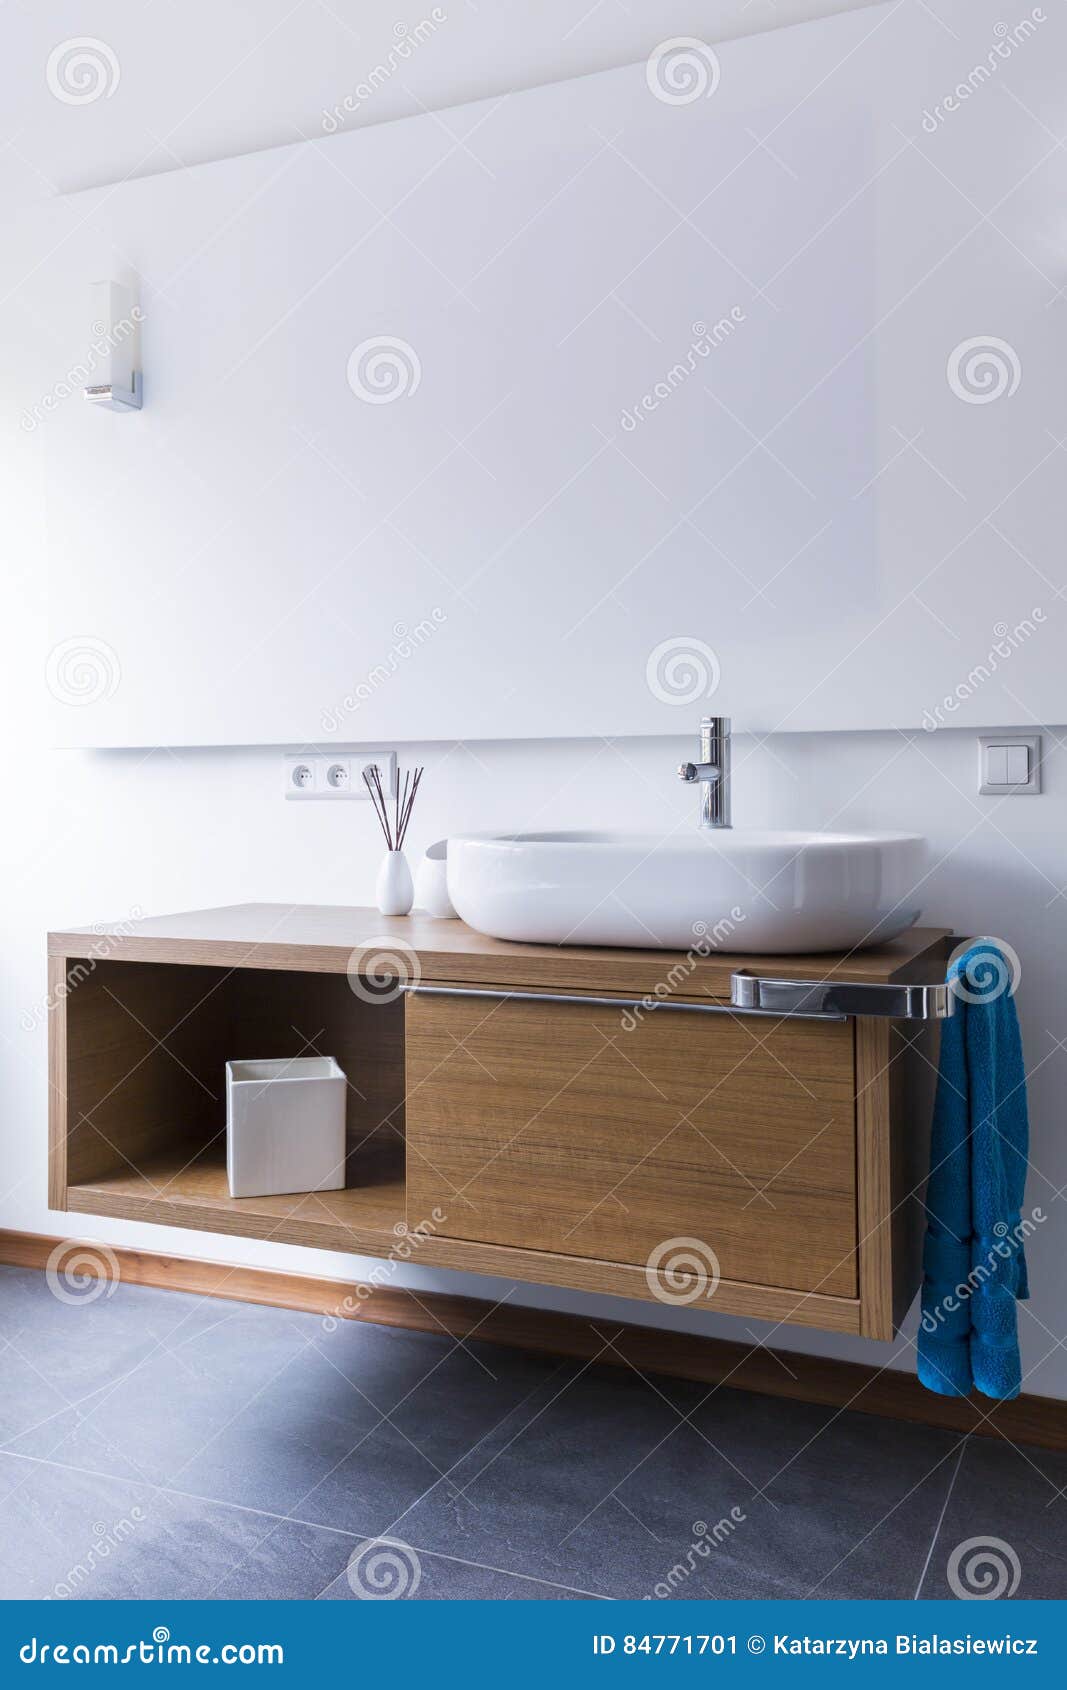 Simple Bathroom With Washbasin And Cabinets Stock Image Image Of